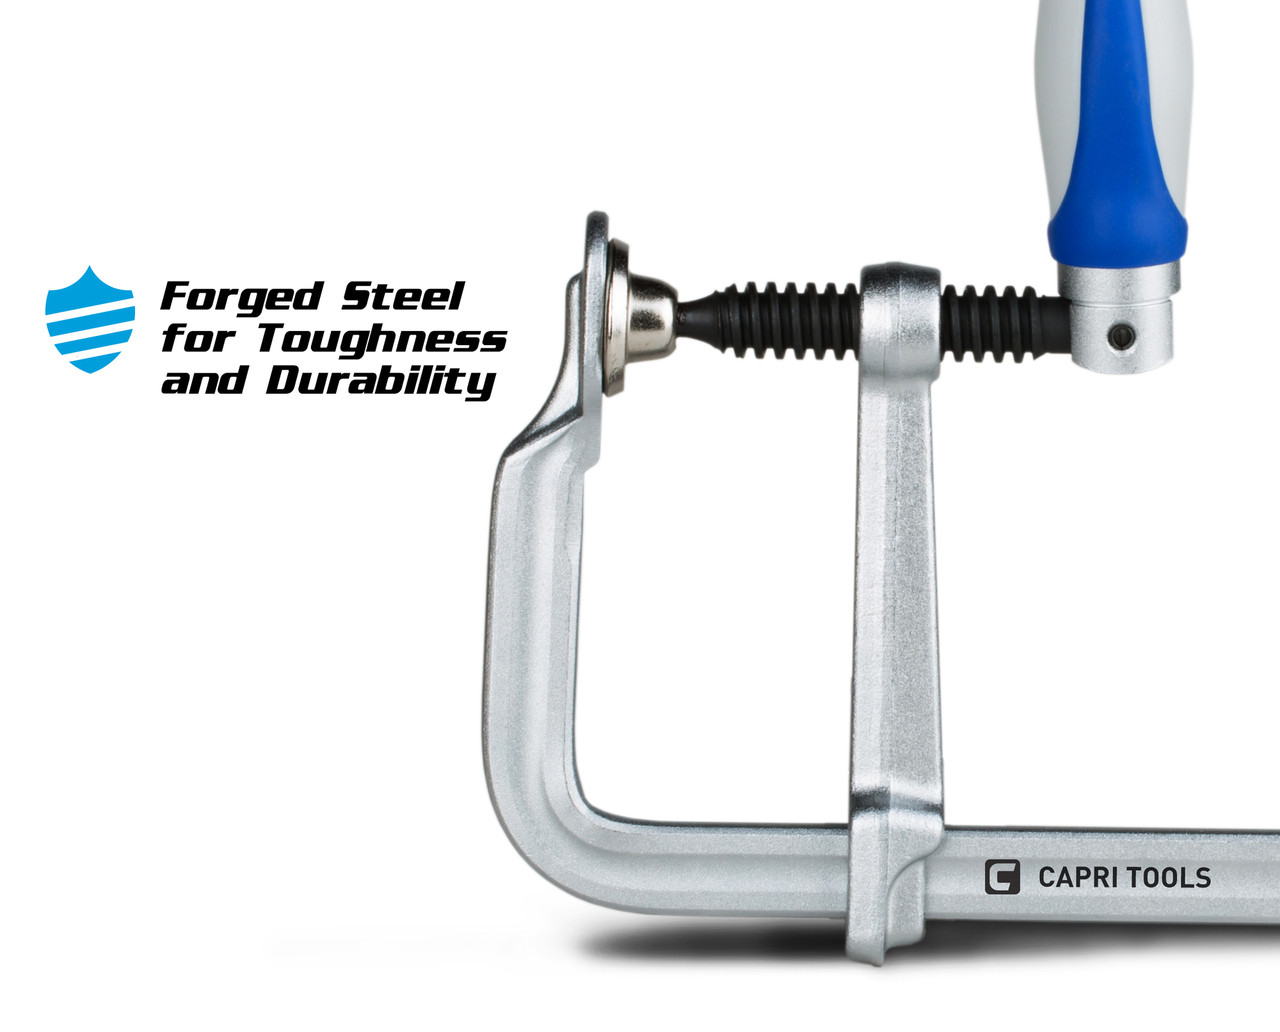 Capri Tools 8-Inch All Steel Bar Clamp with Foldable Ergonomic Handle, 4-Inch Throat Depth, 922 lb Clamping Force